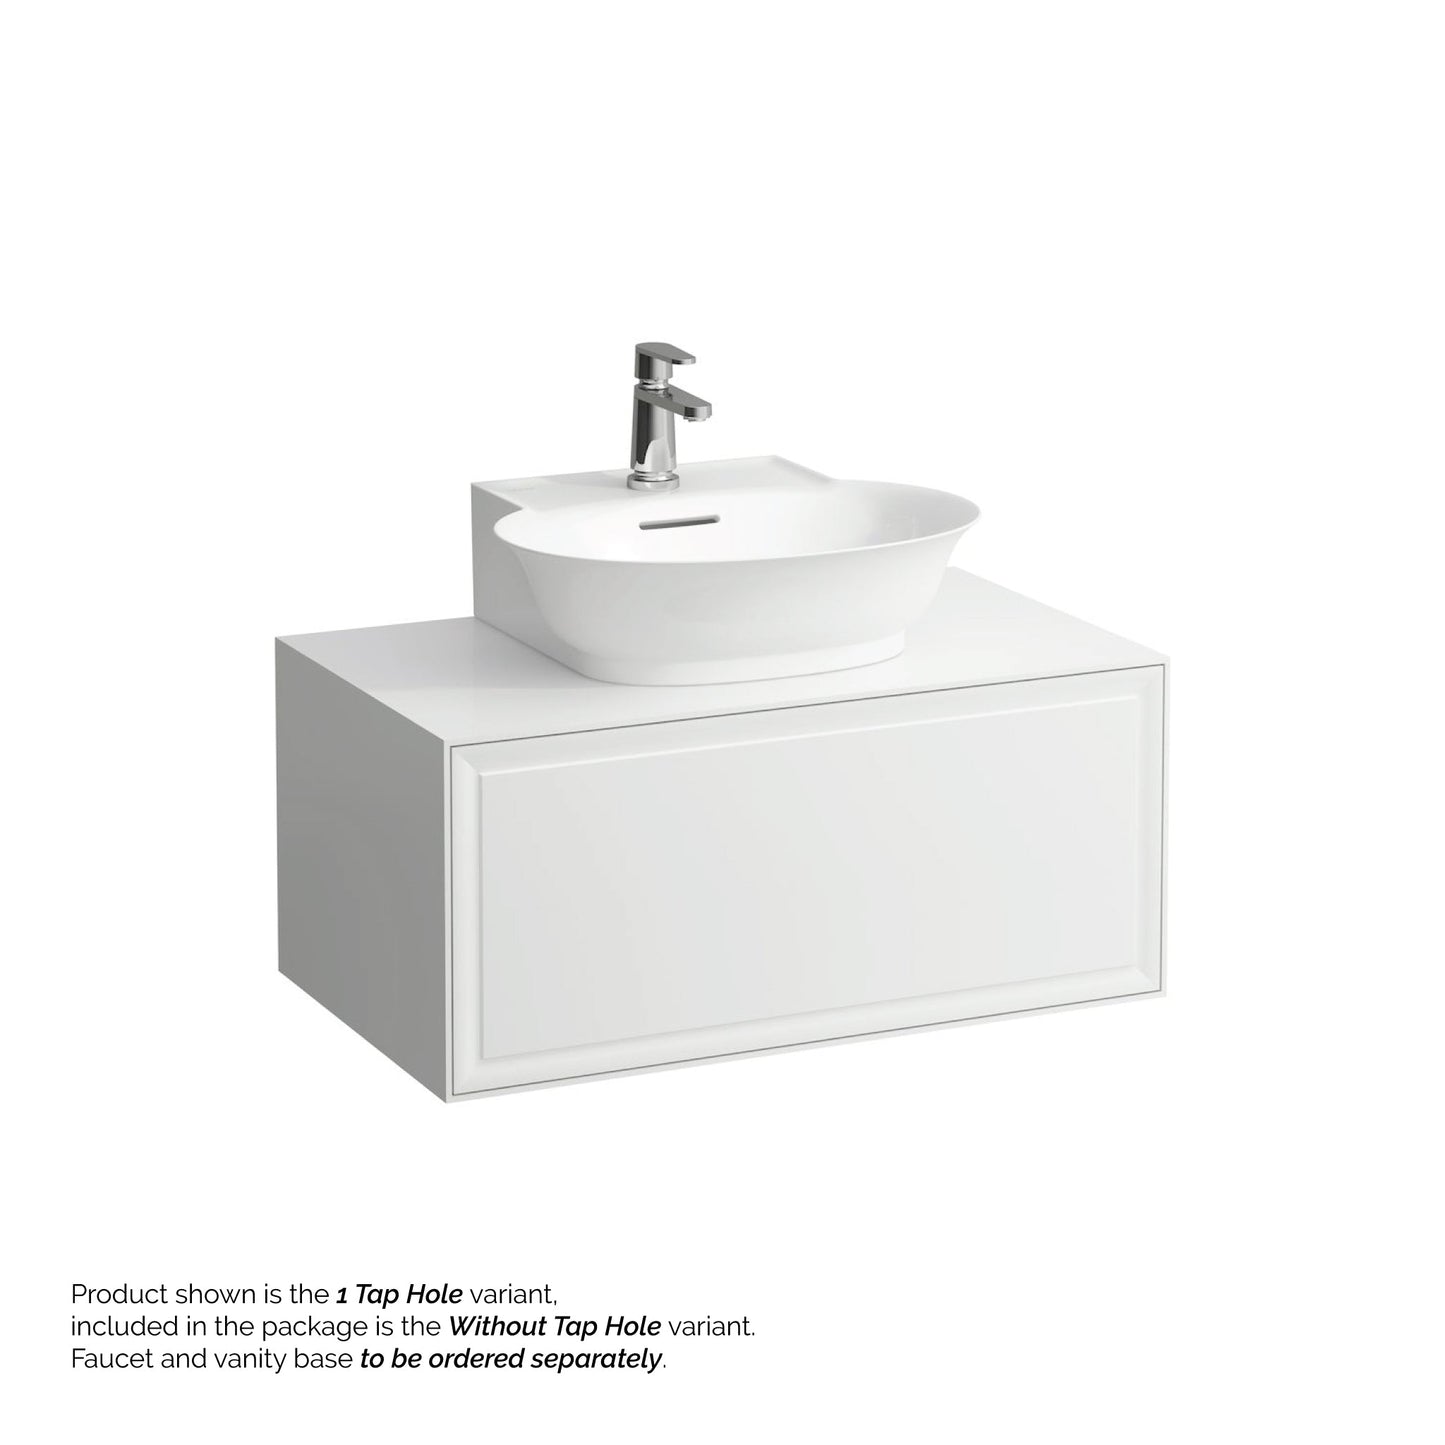 Laufen New Classic 20" x 18" White Ceramic Countertop Bathroom Sink Without Faucet Hole